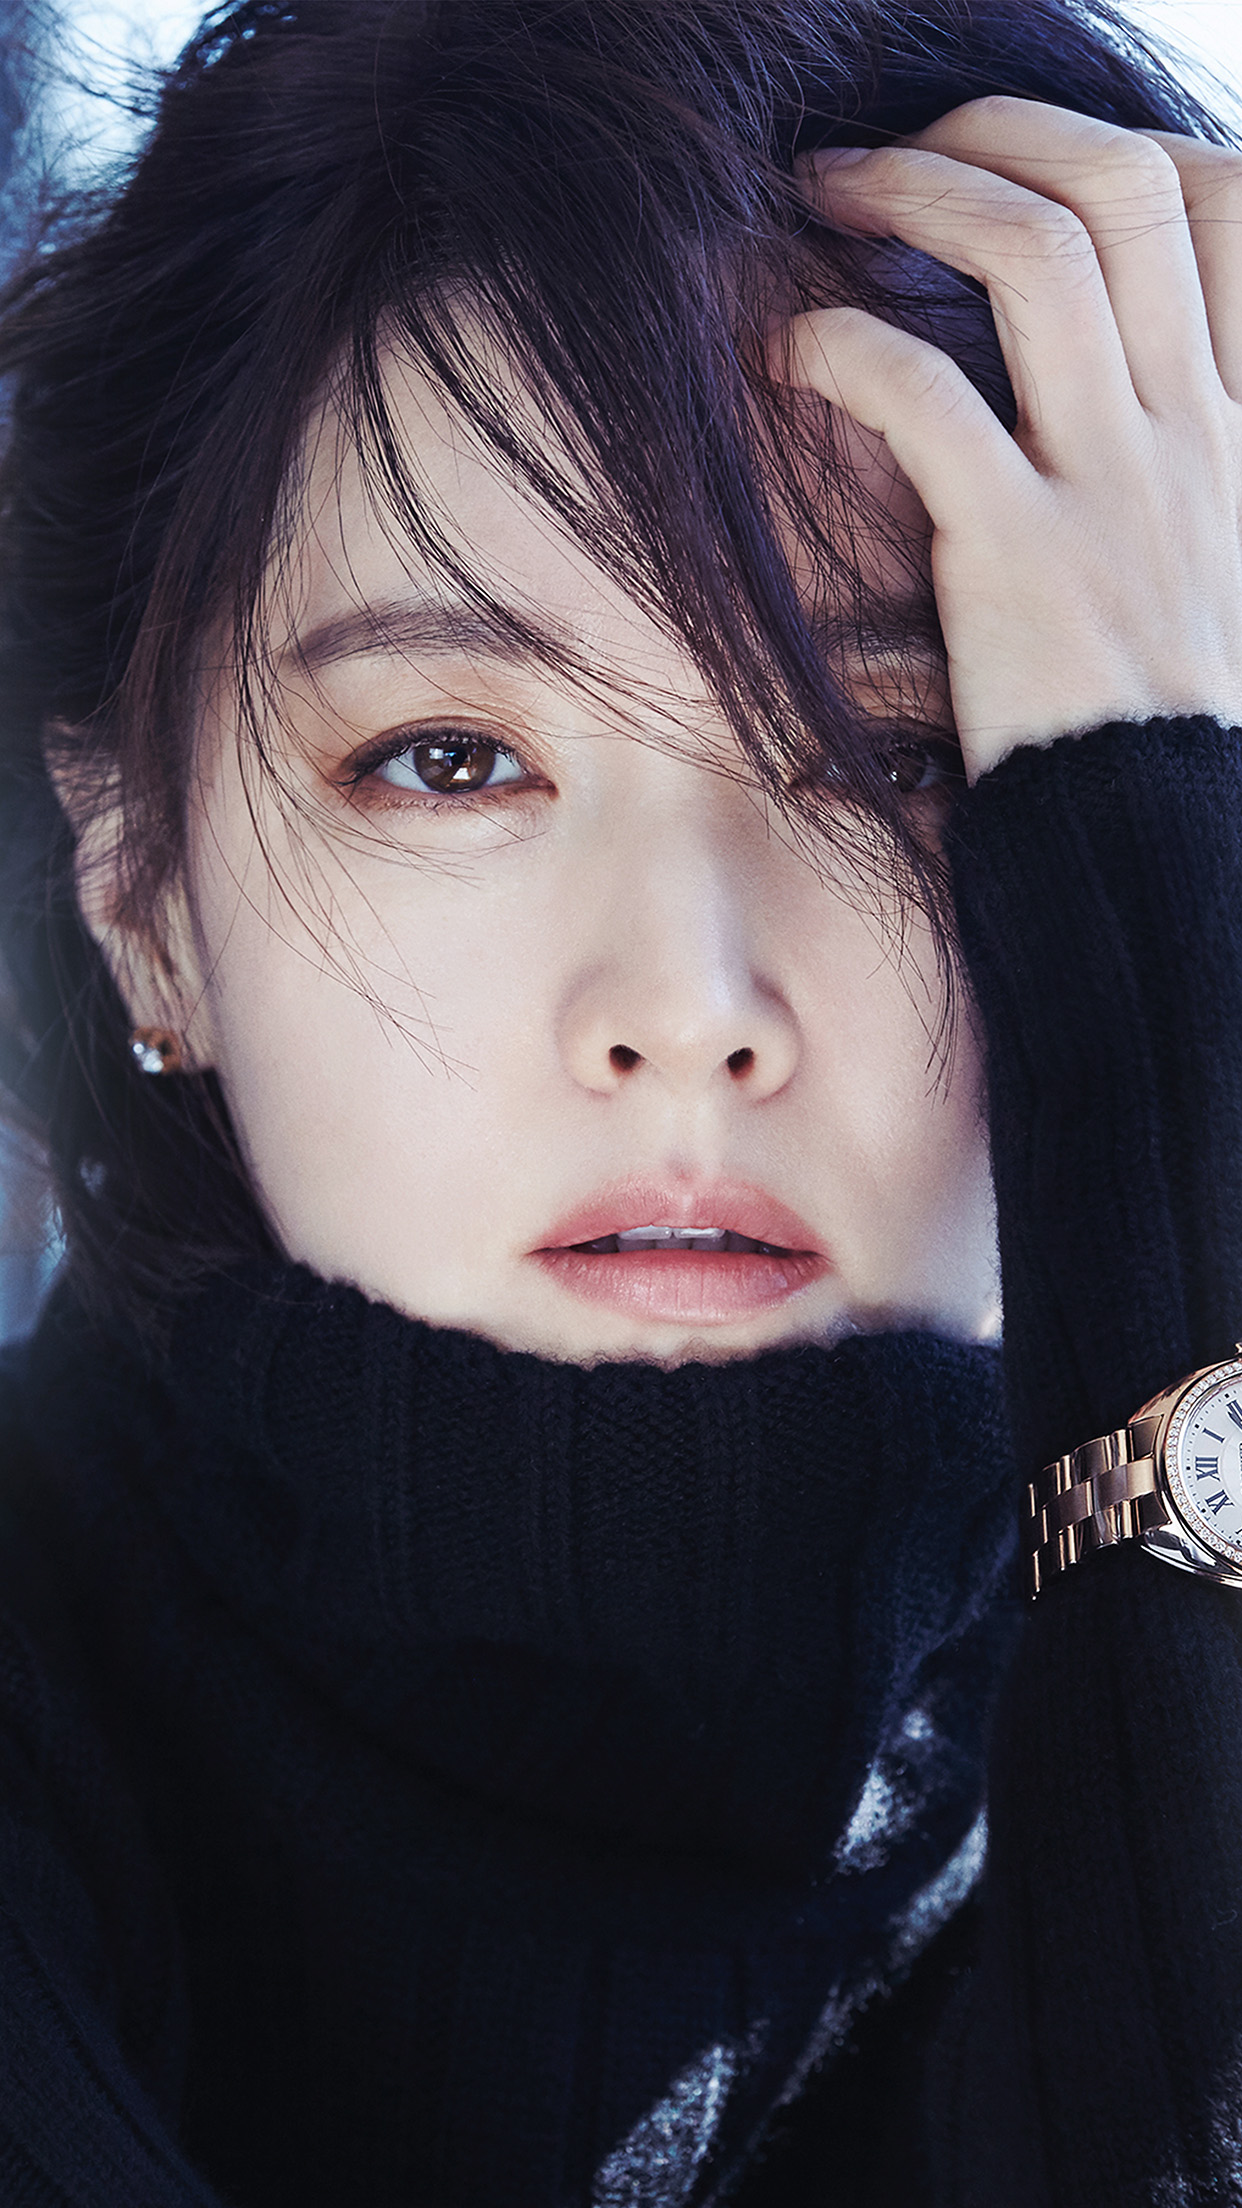 Kpop Star Lee Youngae Beauty Film Android wallpaper